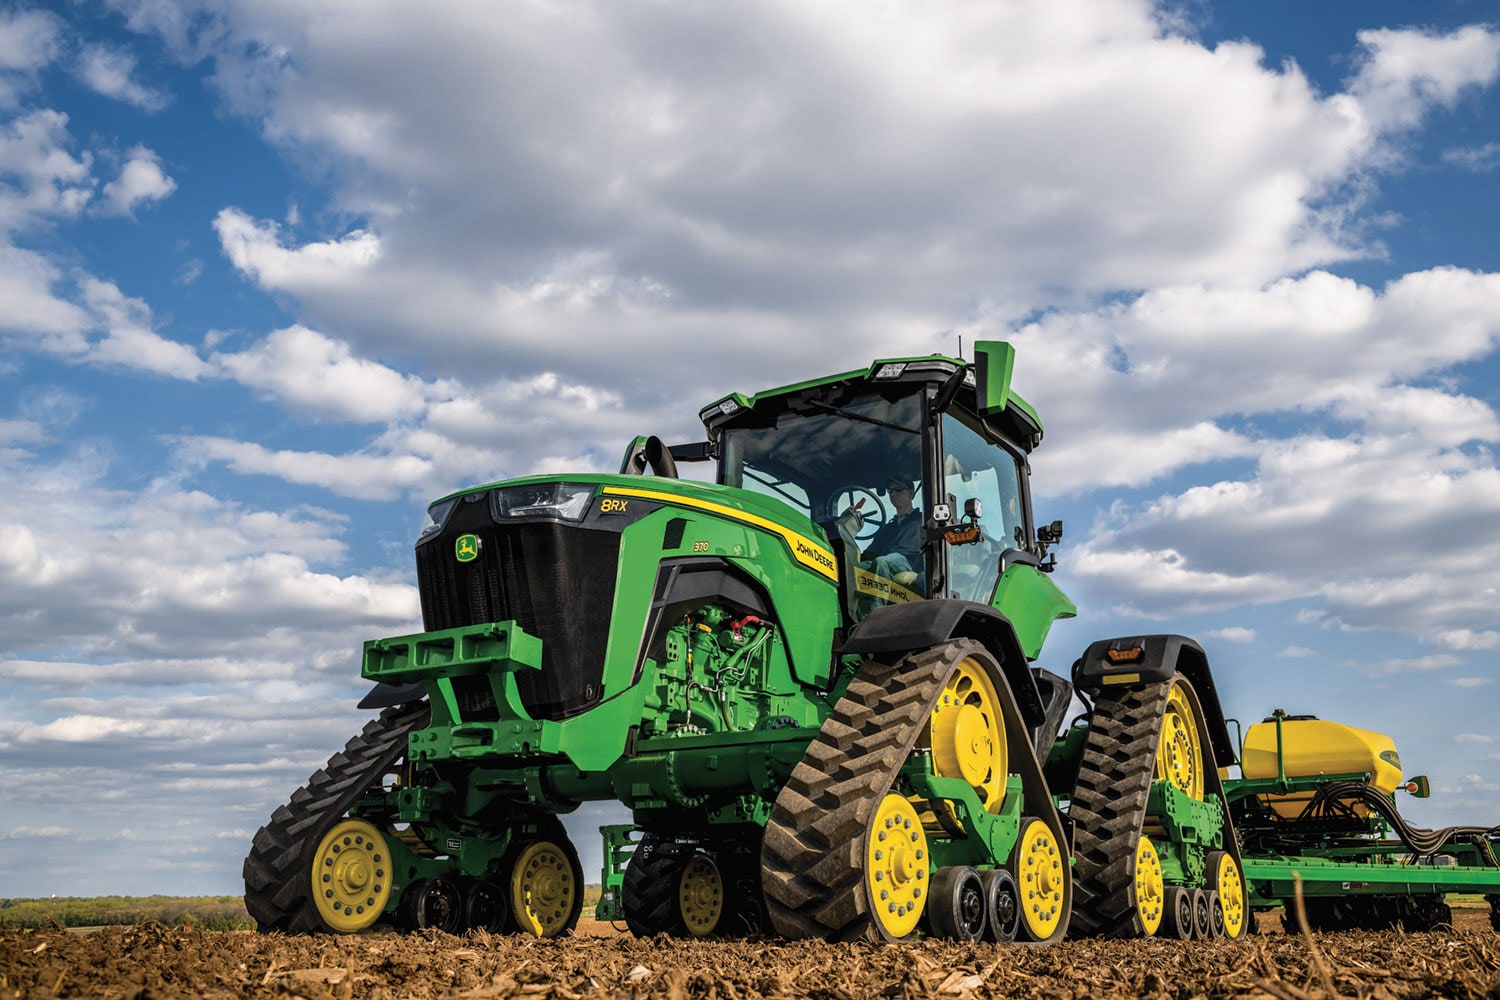 The 8RX 370 is available with a John Deere e23 PowerShift or Infinitely Variable Transmission (IVT).